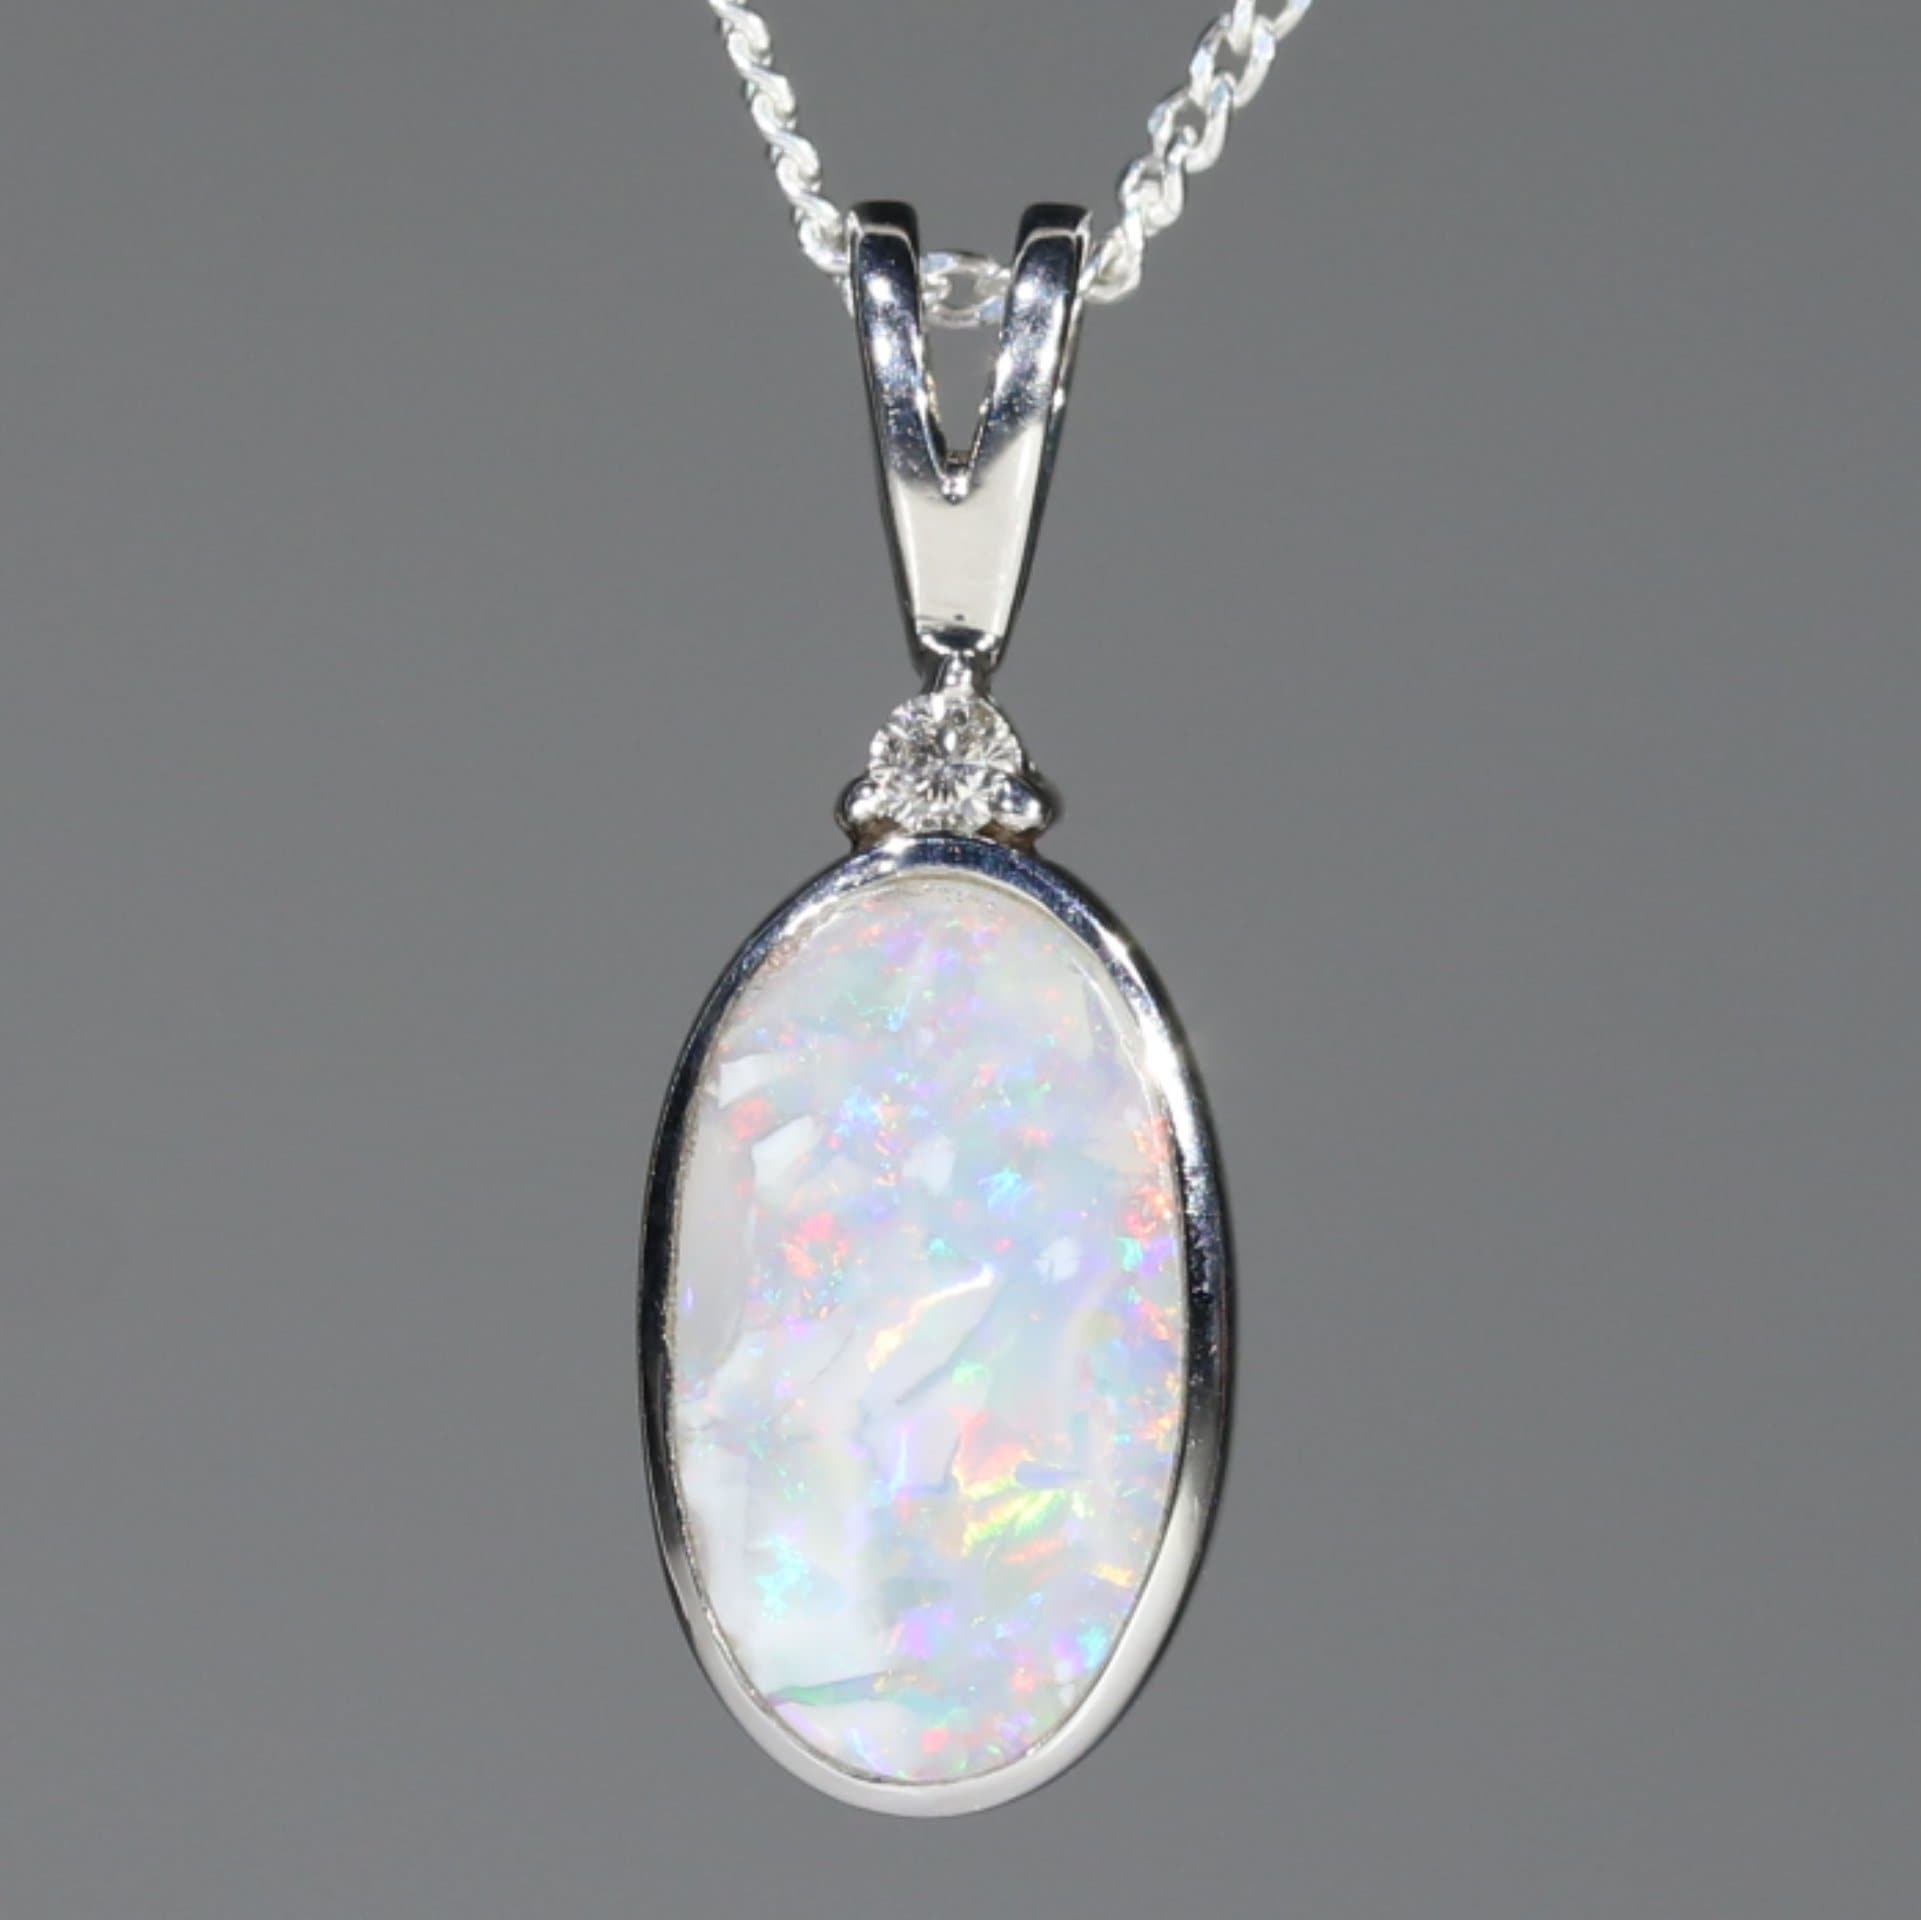 White Opal Necklace - The Silver Shop of Bath